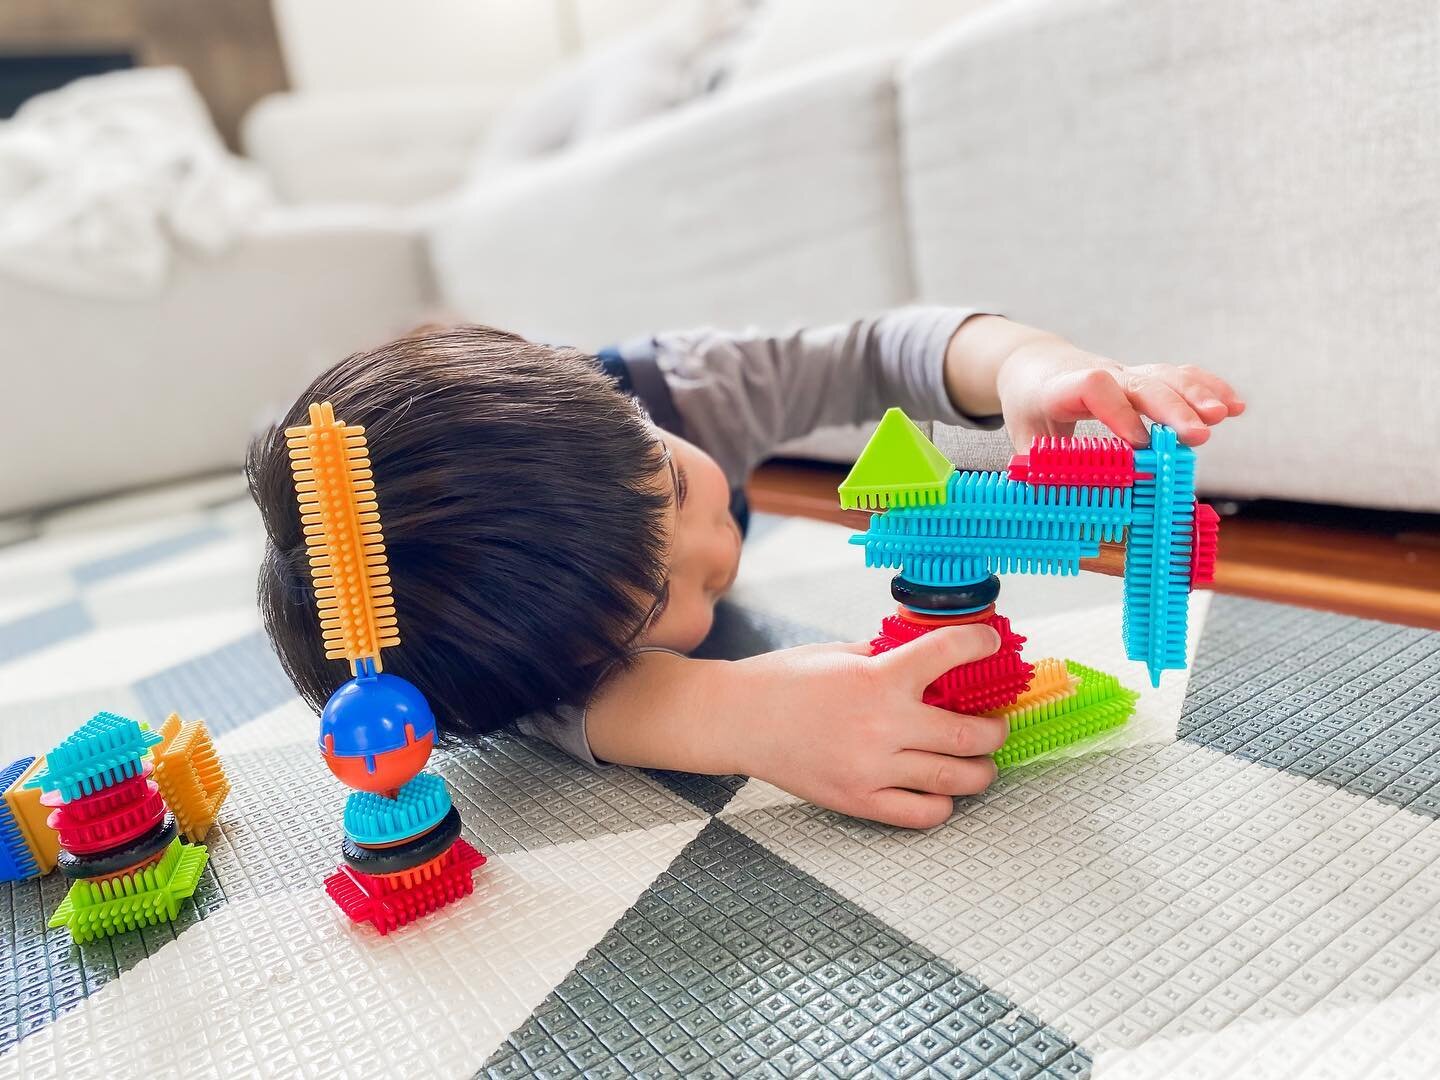 O P E N  E N D E D  T O Y S

The magic of open ended toys! These bristle blocks have been in our toy rotation ever since Lincoln was around 8-9 months old. They are easy for younger babies to stick together and a great toy for toddlers (around 2 year